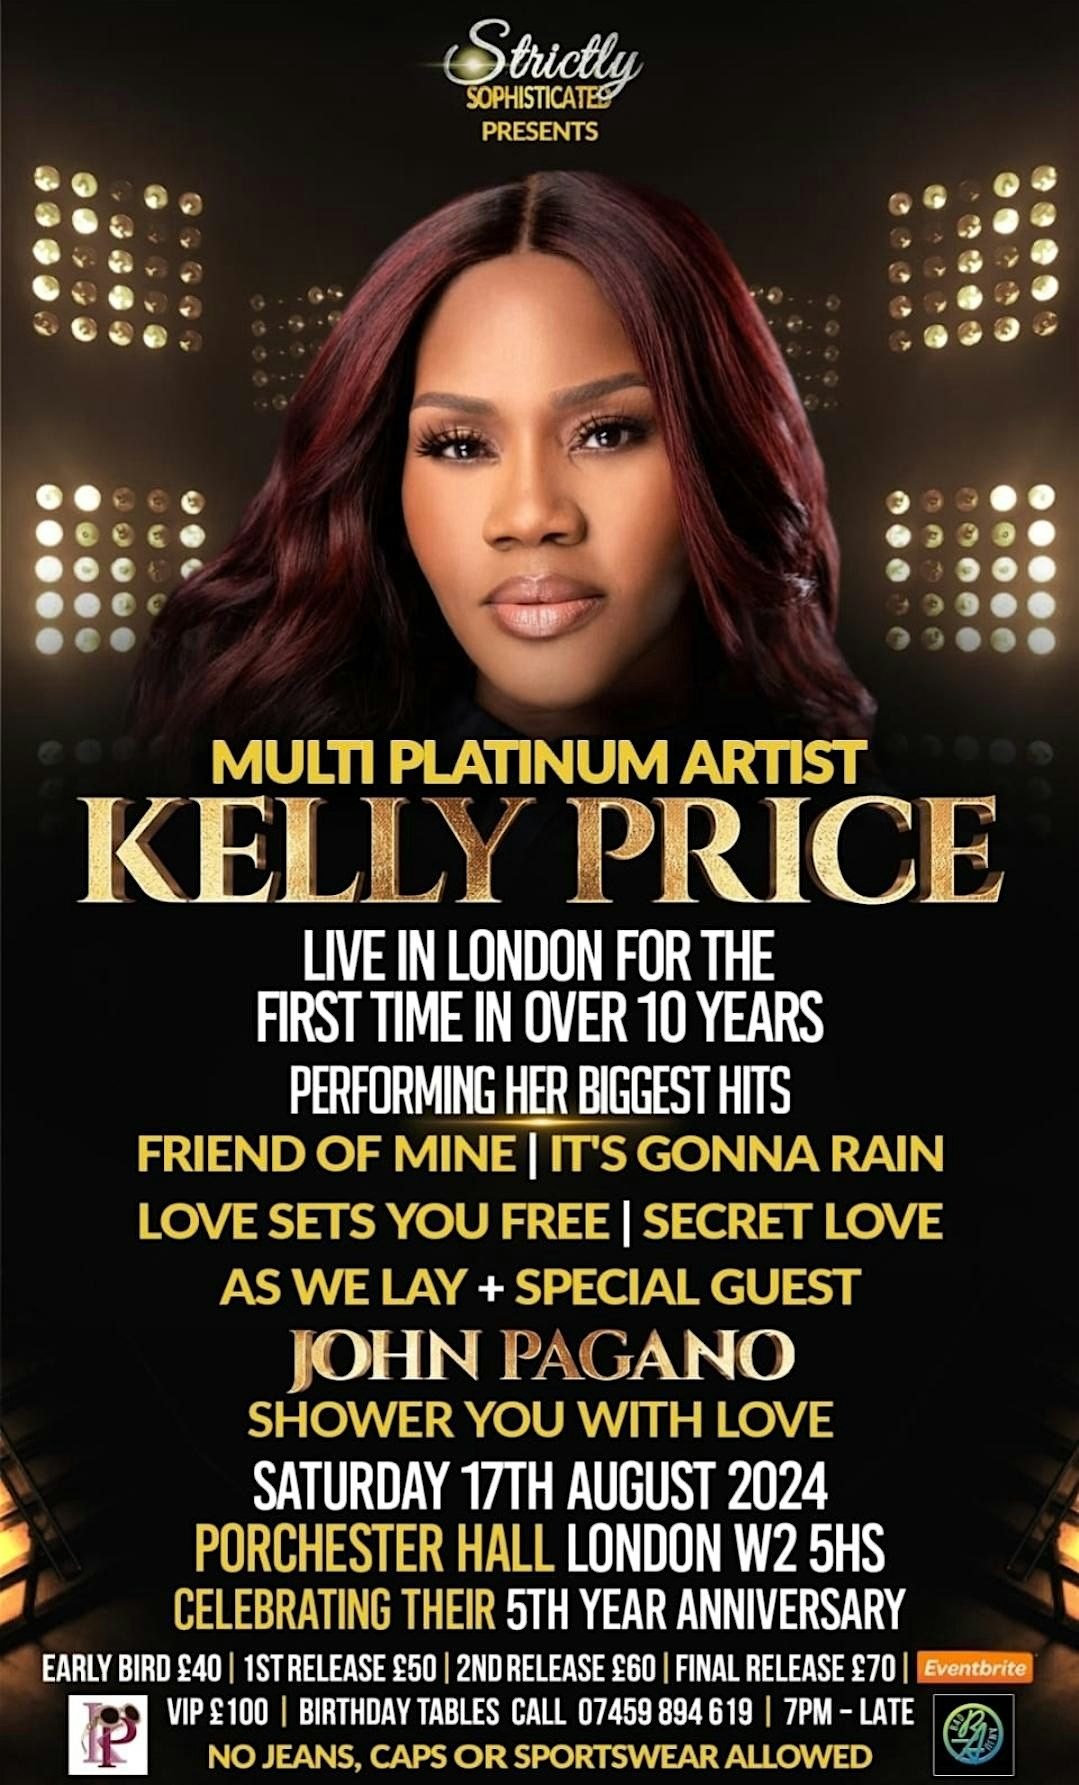 STRICTLY SOPHISTICATED PRESENTS KELLY PRICE & JOHN PAGANO